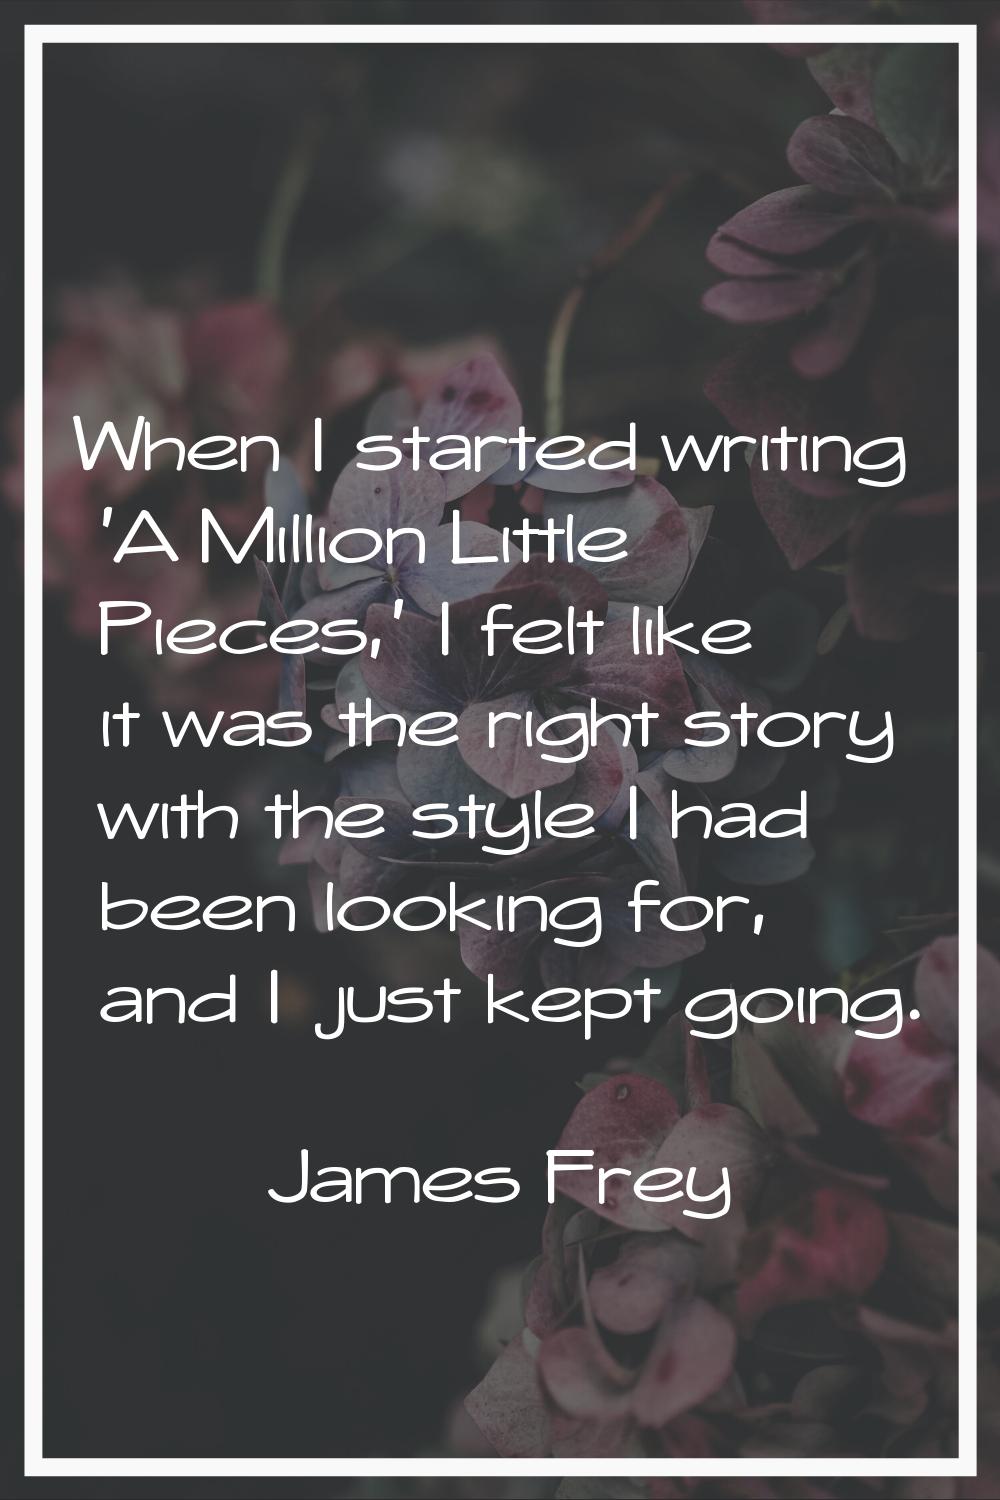 When I started writing 'A Million Little Pieces,' I felt like it was the right story with the style